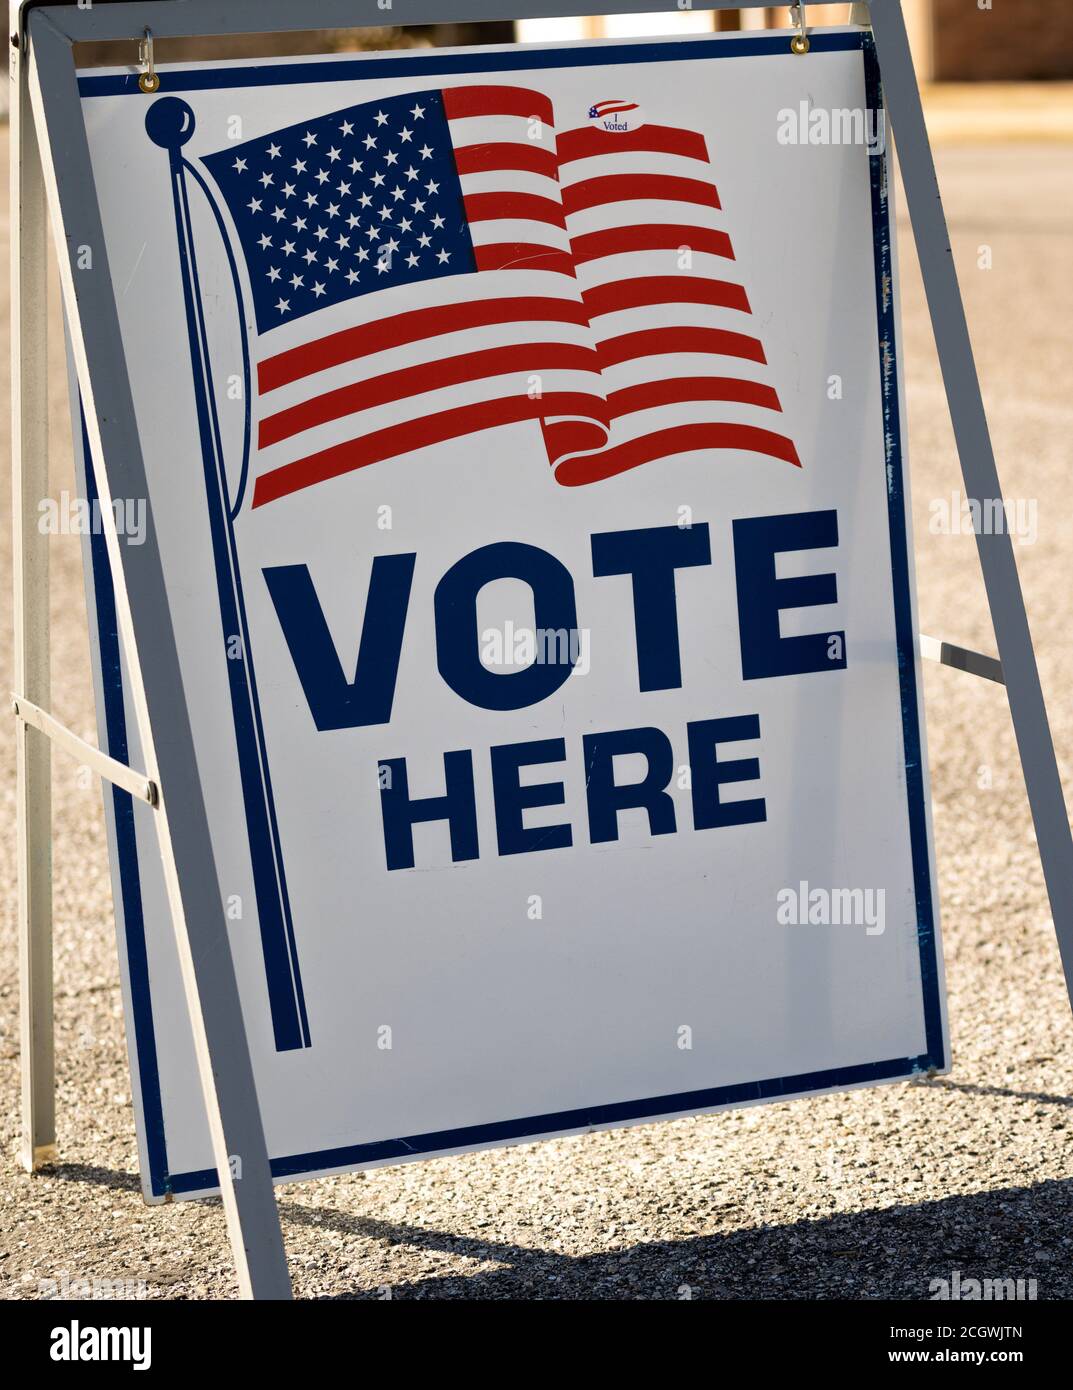 Vote Here sign in a parking lot Stock Photo